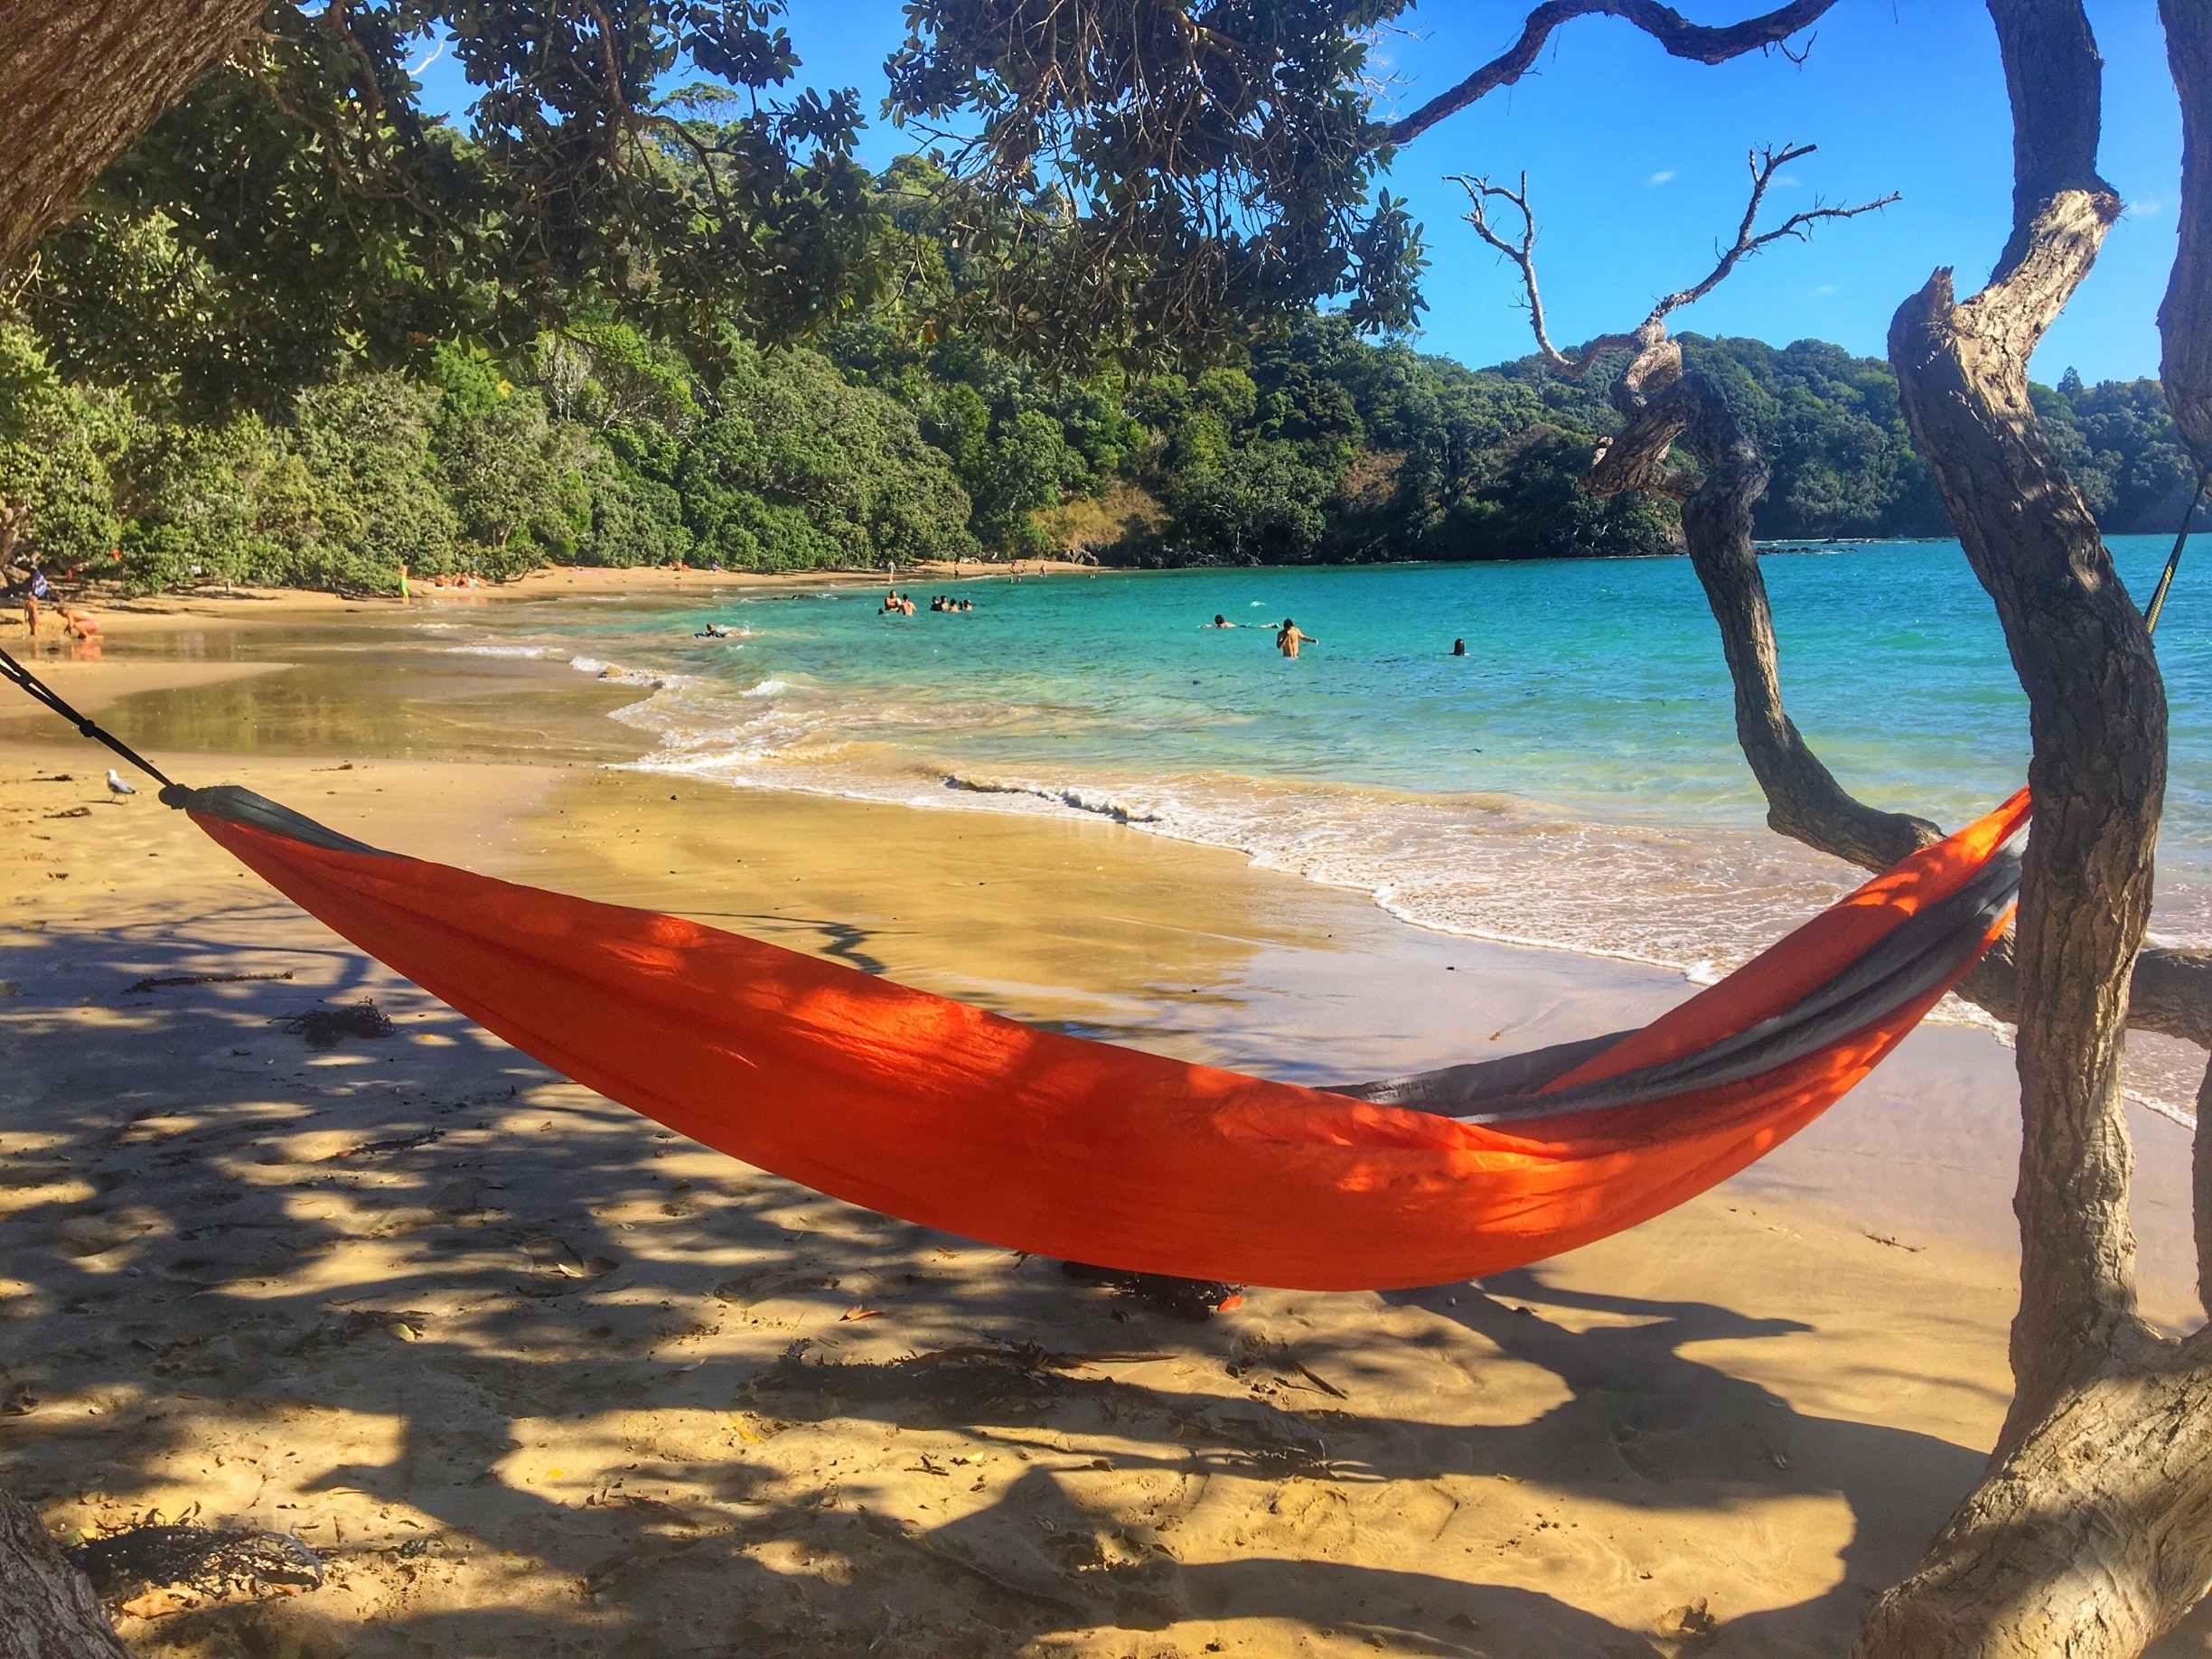 Want to set up your hammock here? Head up to Whale Bay, just outside of Whangarei, Northern NZ. Just a short hike down from the car park and this stunning beach with calm waters is all yours. 
#whalebay #whangarei #newzealand #northisland #hiddengems #explore #travel 